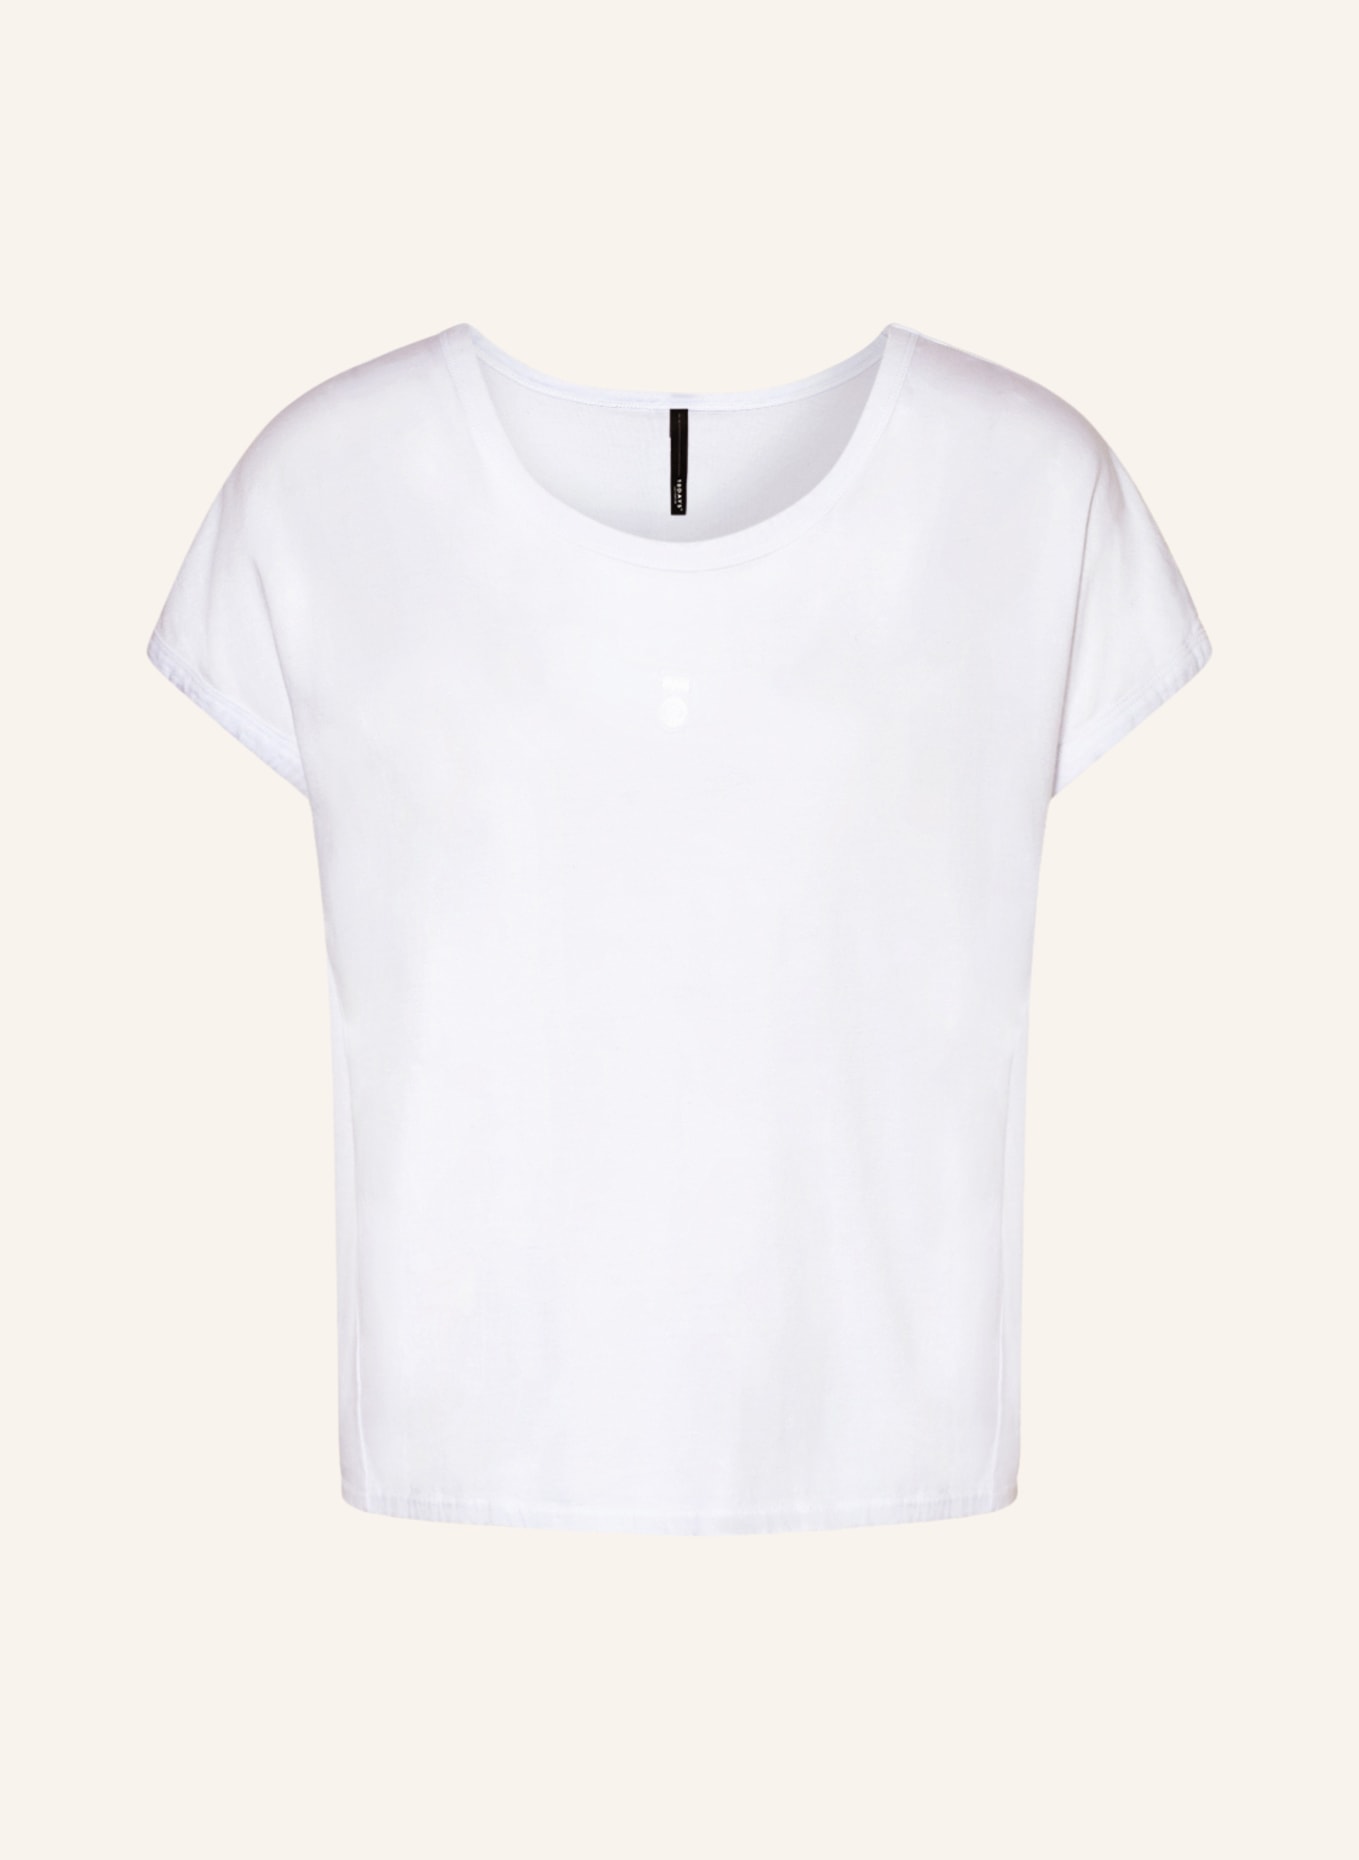 10DAYS T-shirt, Color: WHITE (Image 1)